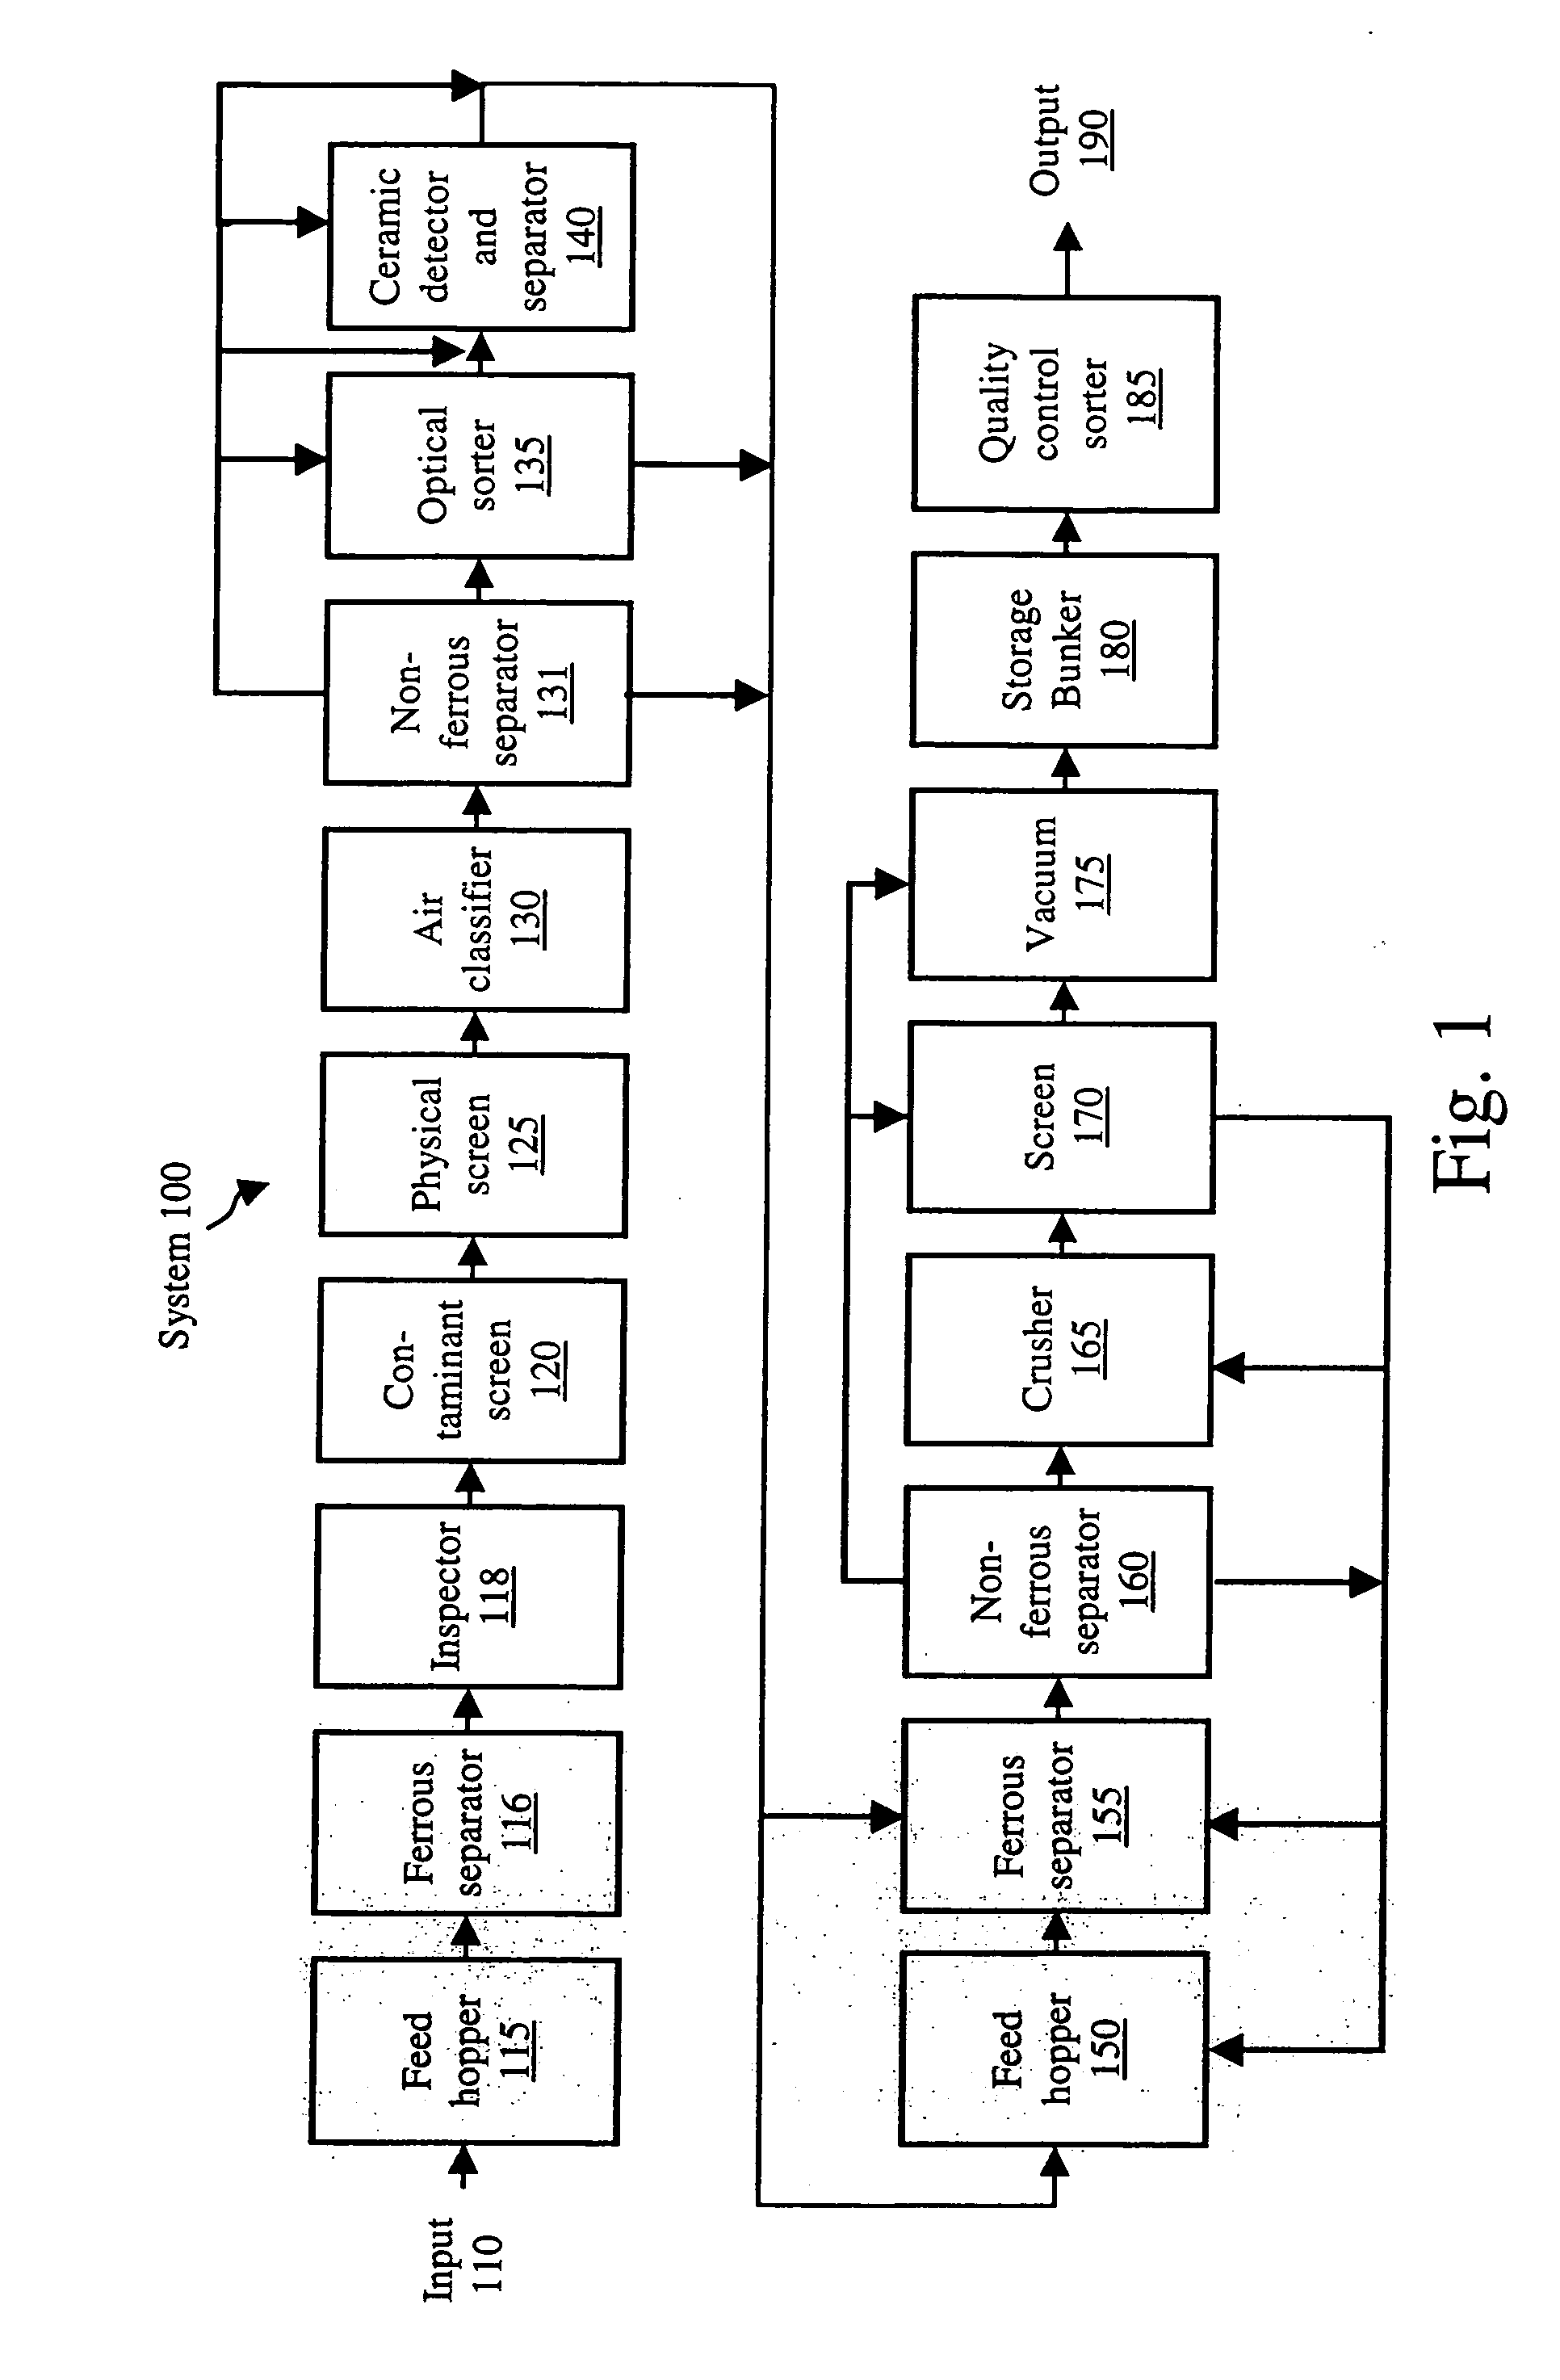 System and methods for glass recycling at a beneficiator